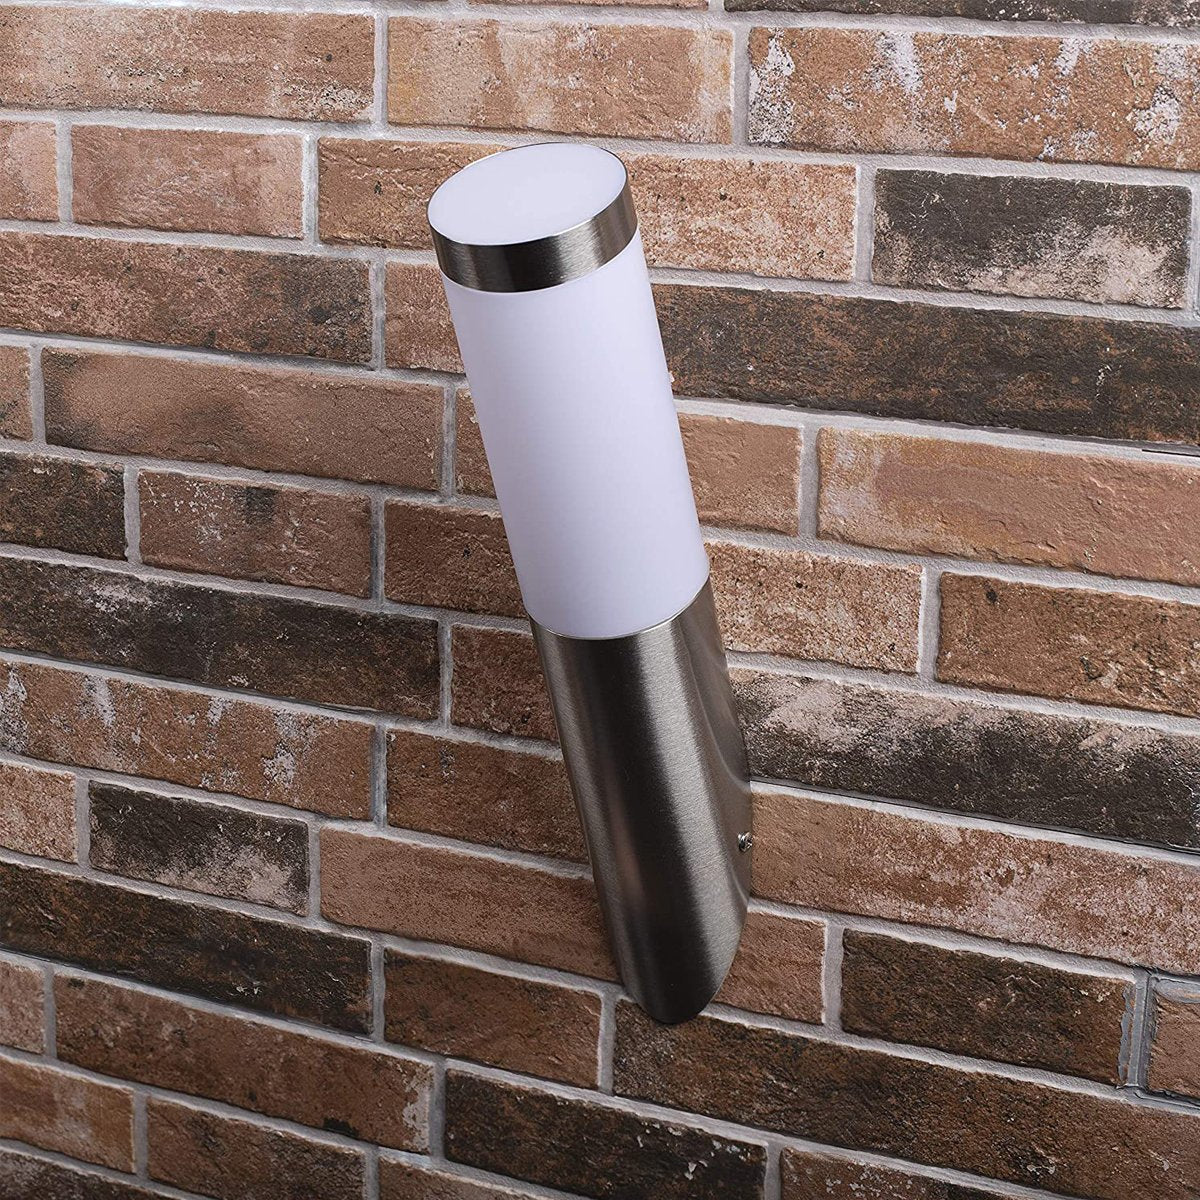 The Aster wall light's rounded silhouette, stainless steel body, and polycarbonate diffuser harmoniously merge to create a stylish, modern look. This outdoor lighting fixture is ideal for a variety of venues, including gardens, driveways, doorways, workspaces, pubs, and hotels, providing both illumination and security.